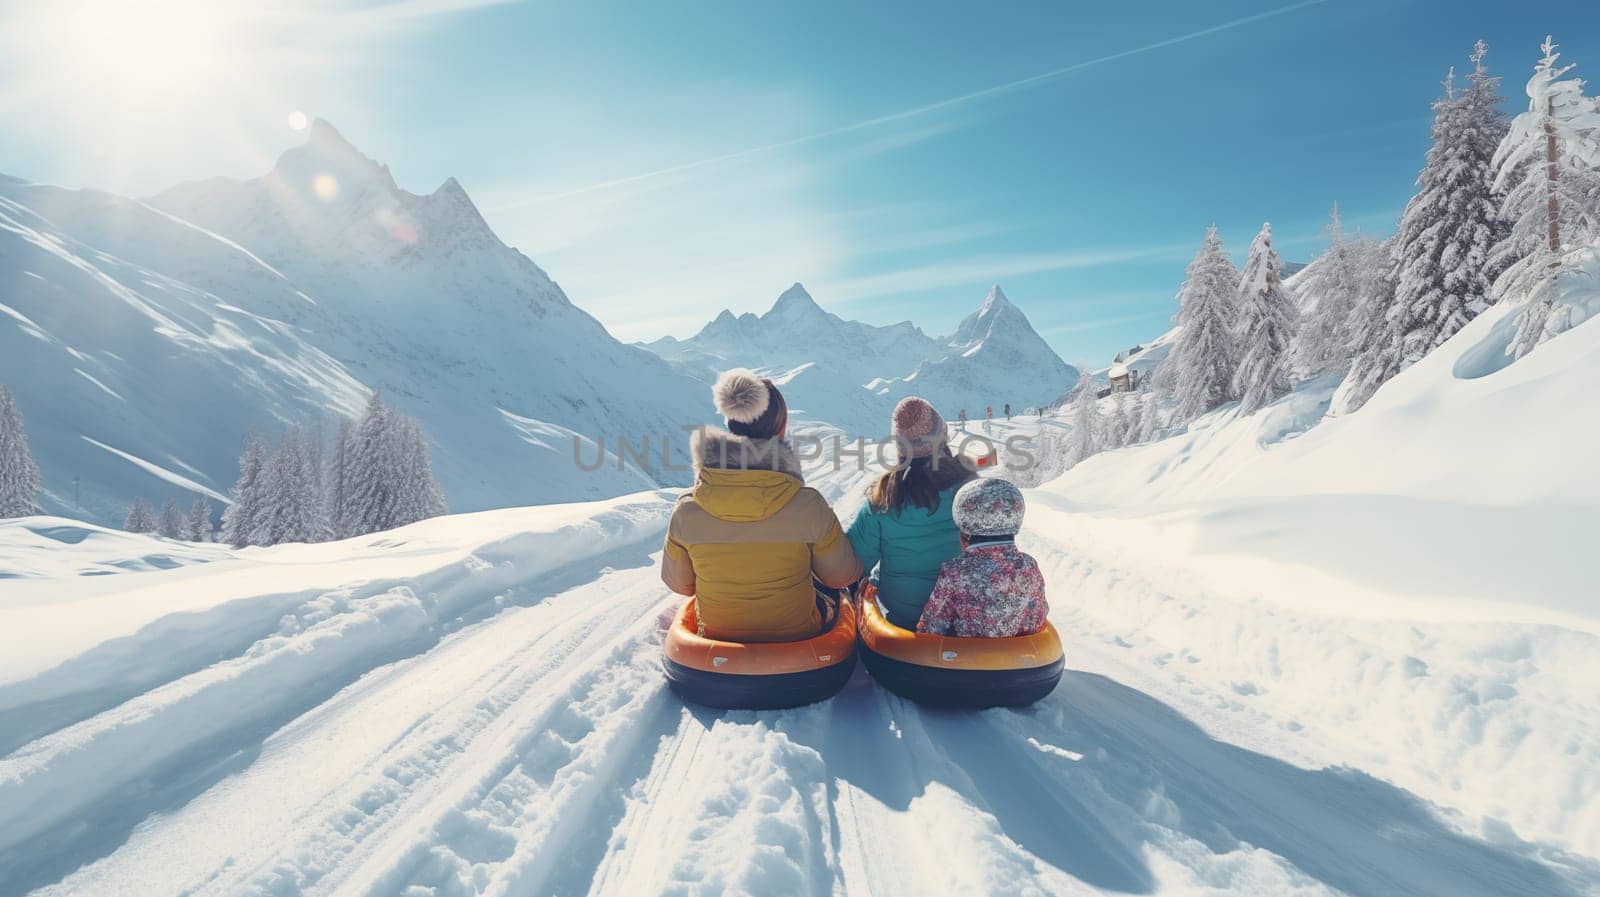 Family tubing down a snowy hill with mountain backdrop,rear view by Zakharova